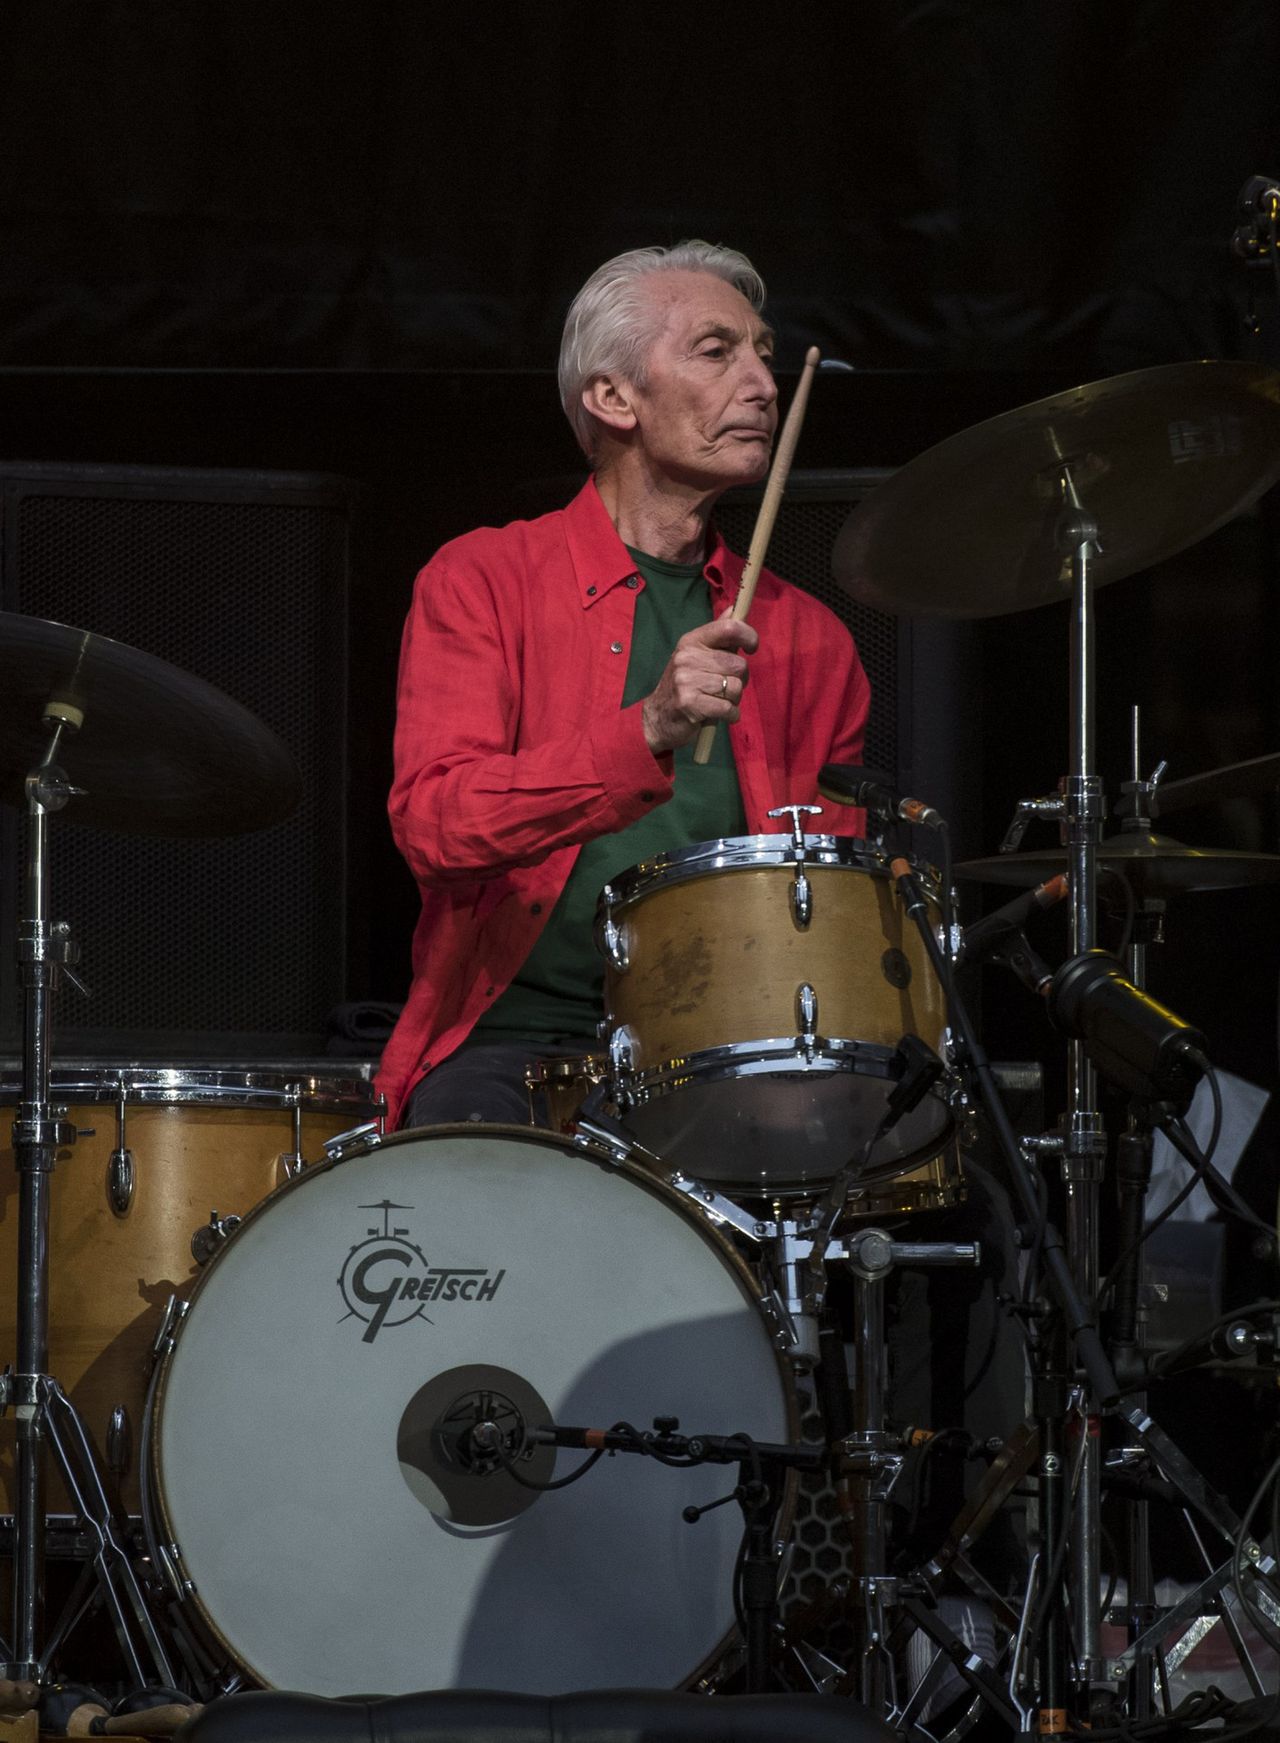 The Rolling Stones performing at The  Principality Stadium, Cardiff, Wales on 15th June 2018.  Charlie Watts - drums.